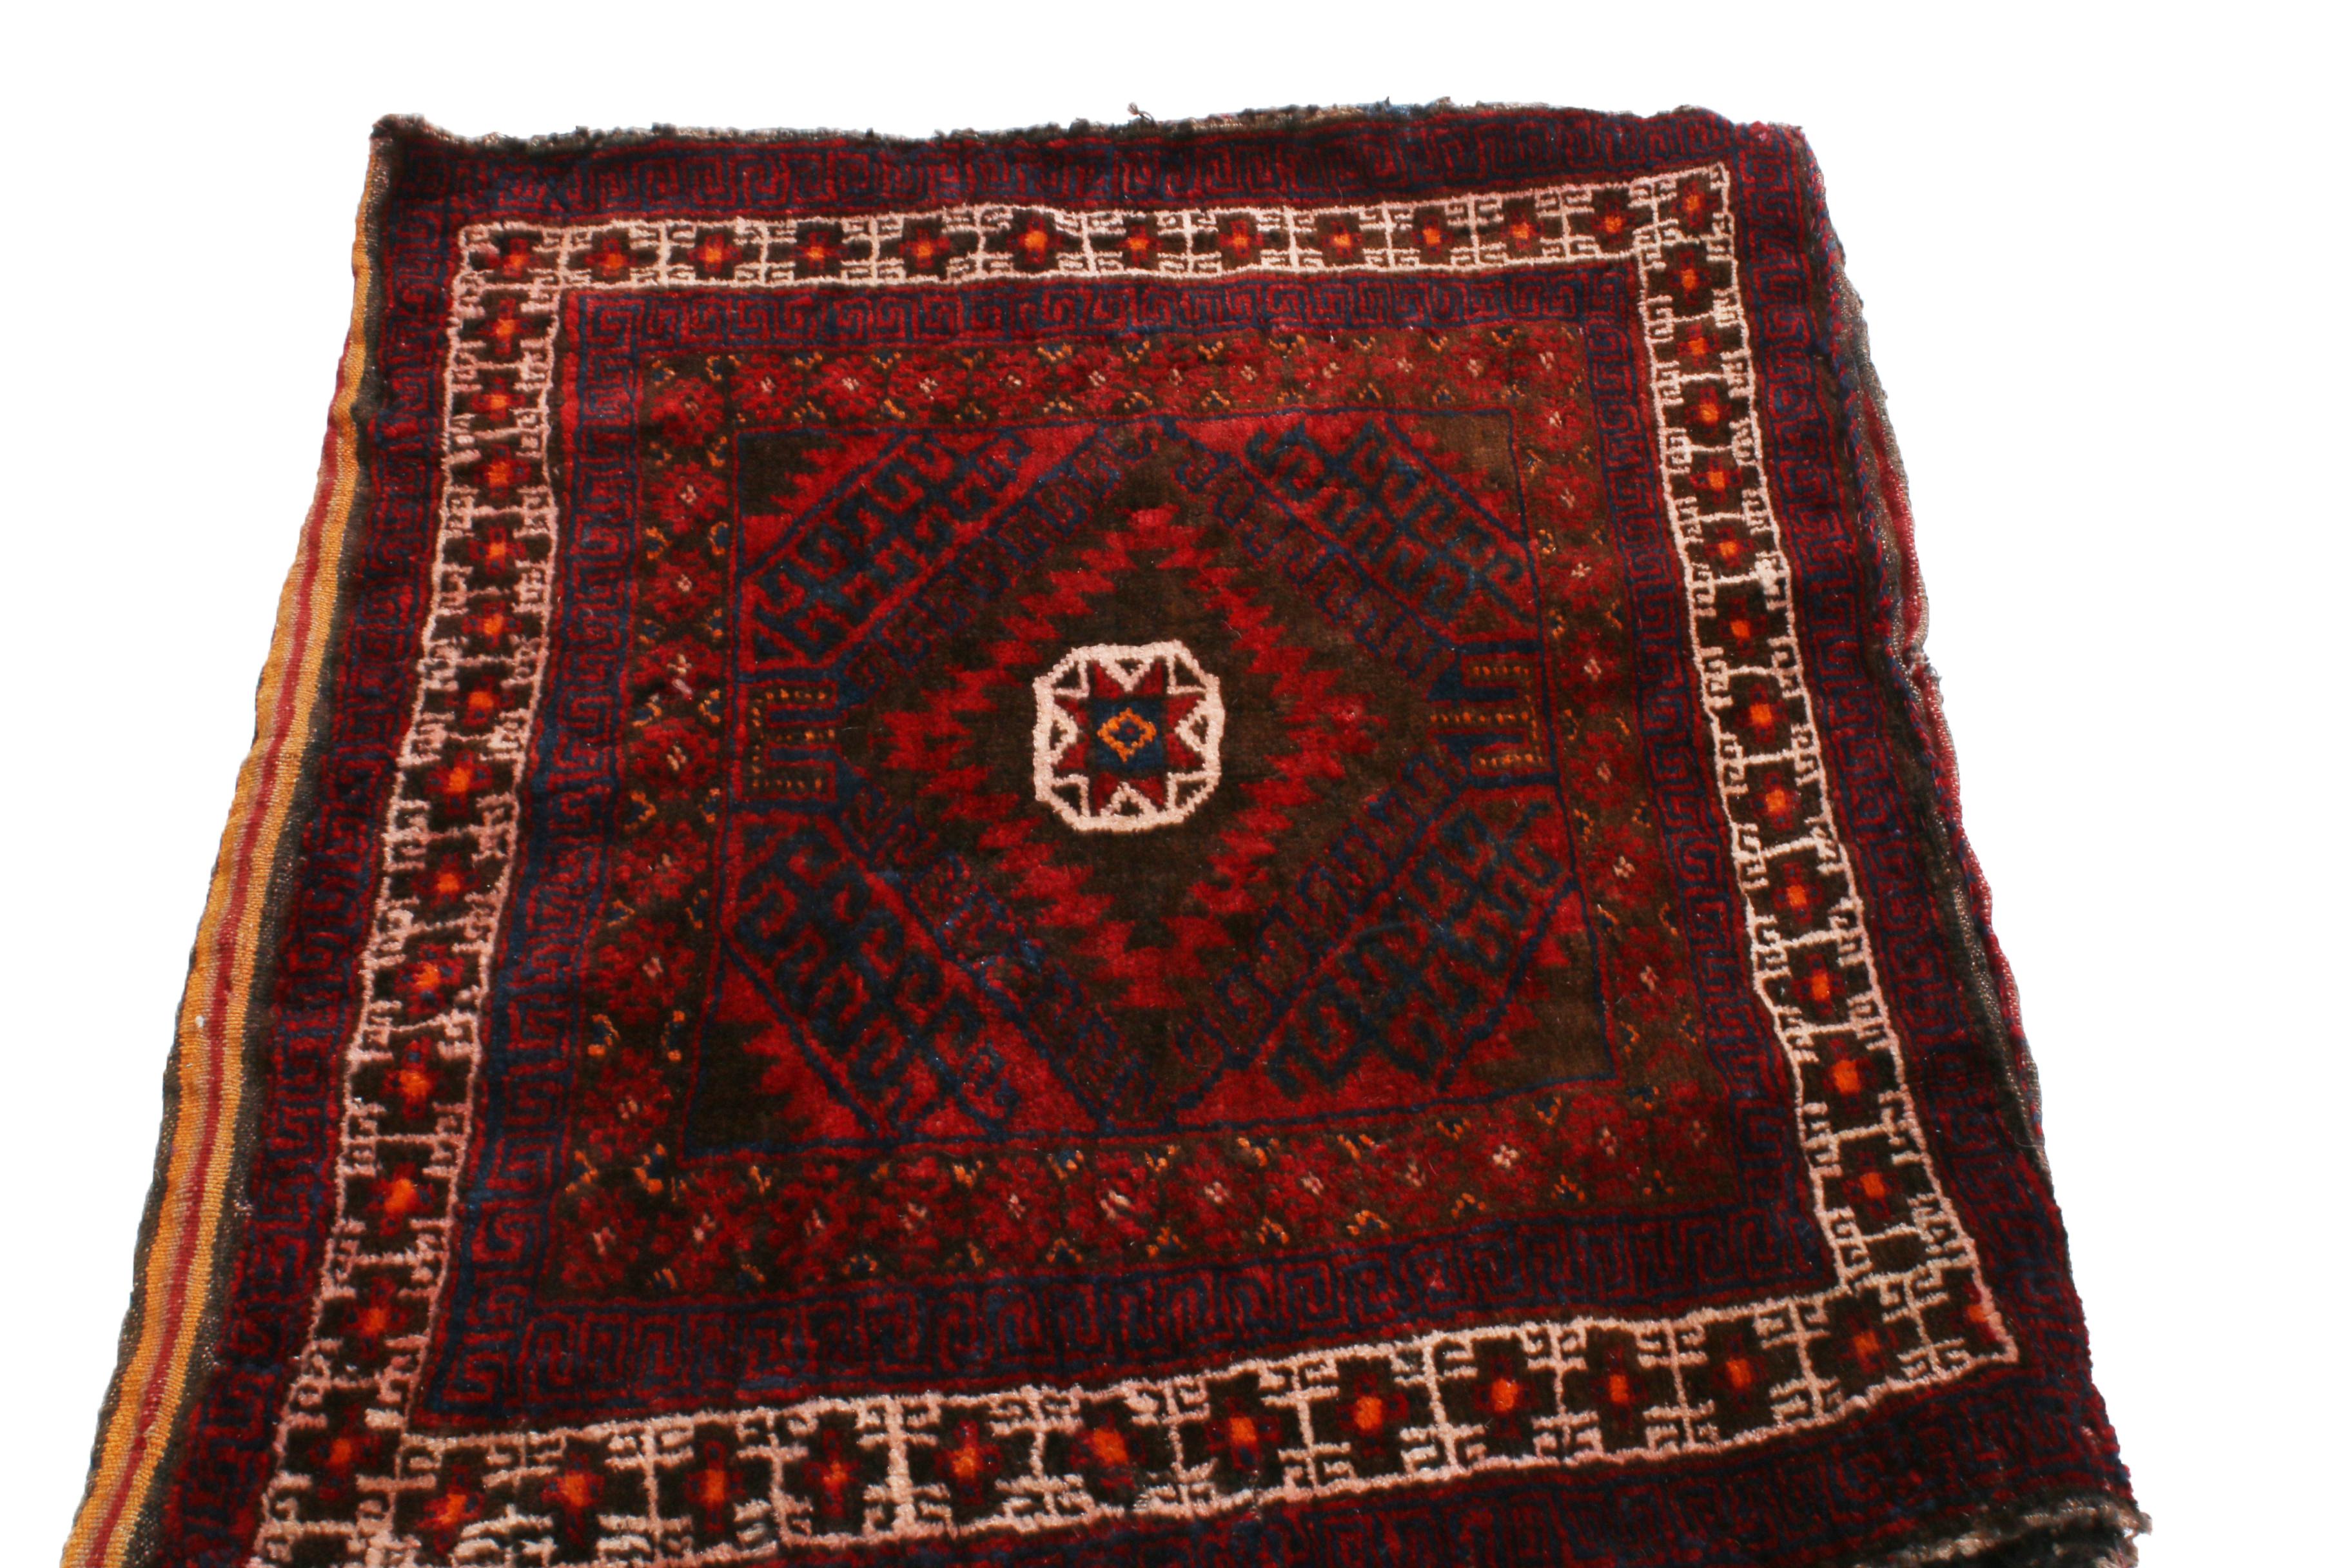 Originating from Persia between 1930-1950, this vintage Persian rug is hand knotted with a durable, luminous wool body with a rich and bright combination of field and border motifs strongly resembling the oriental symbols for the eight-pointed star